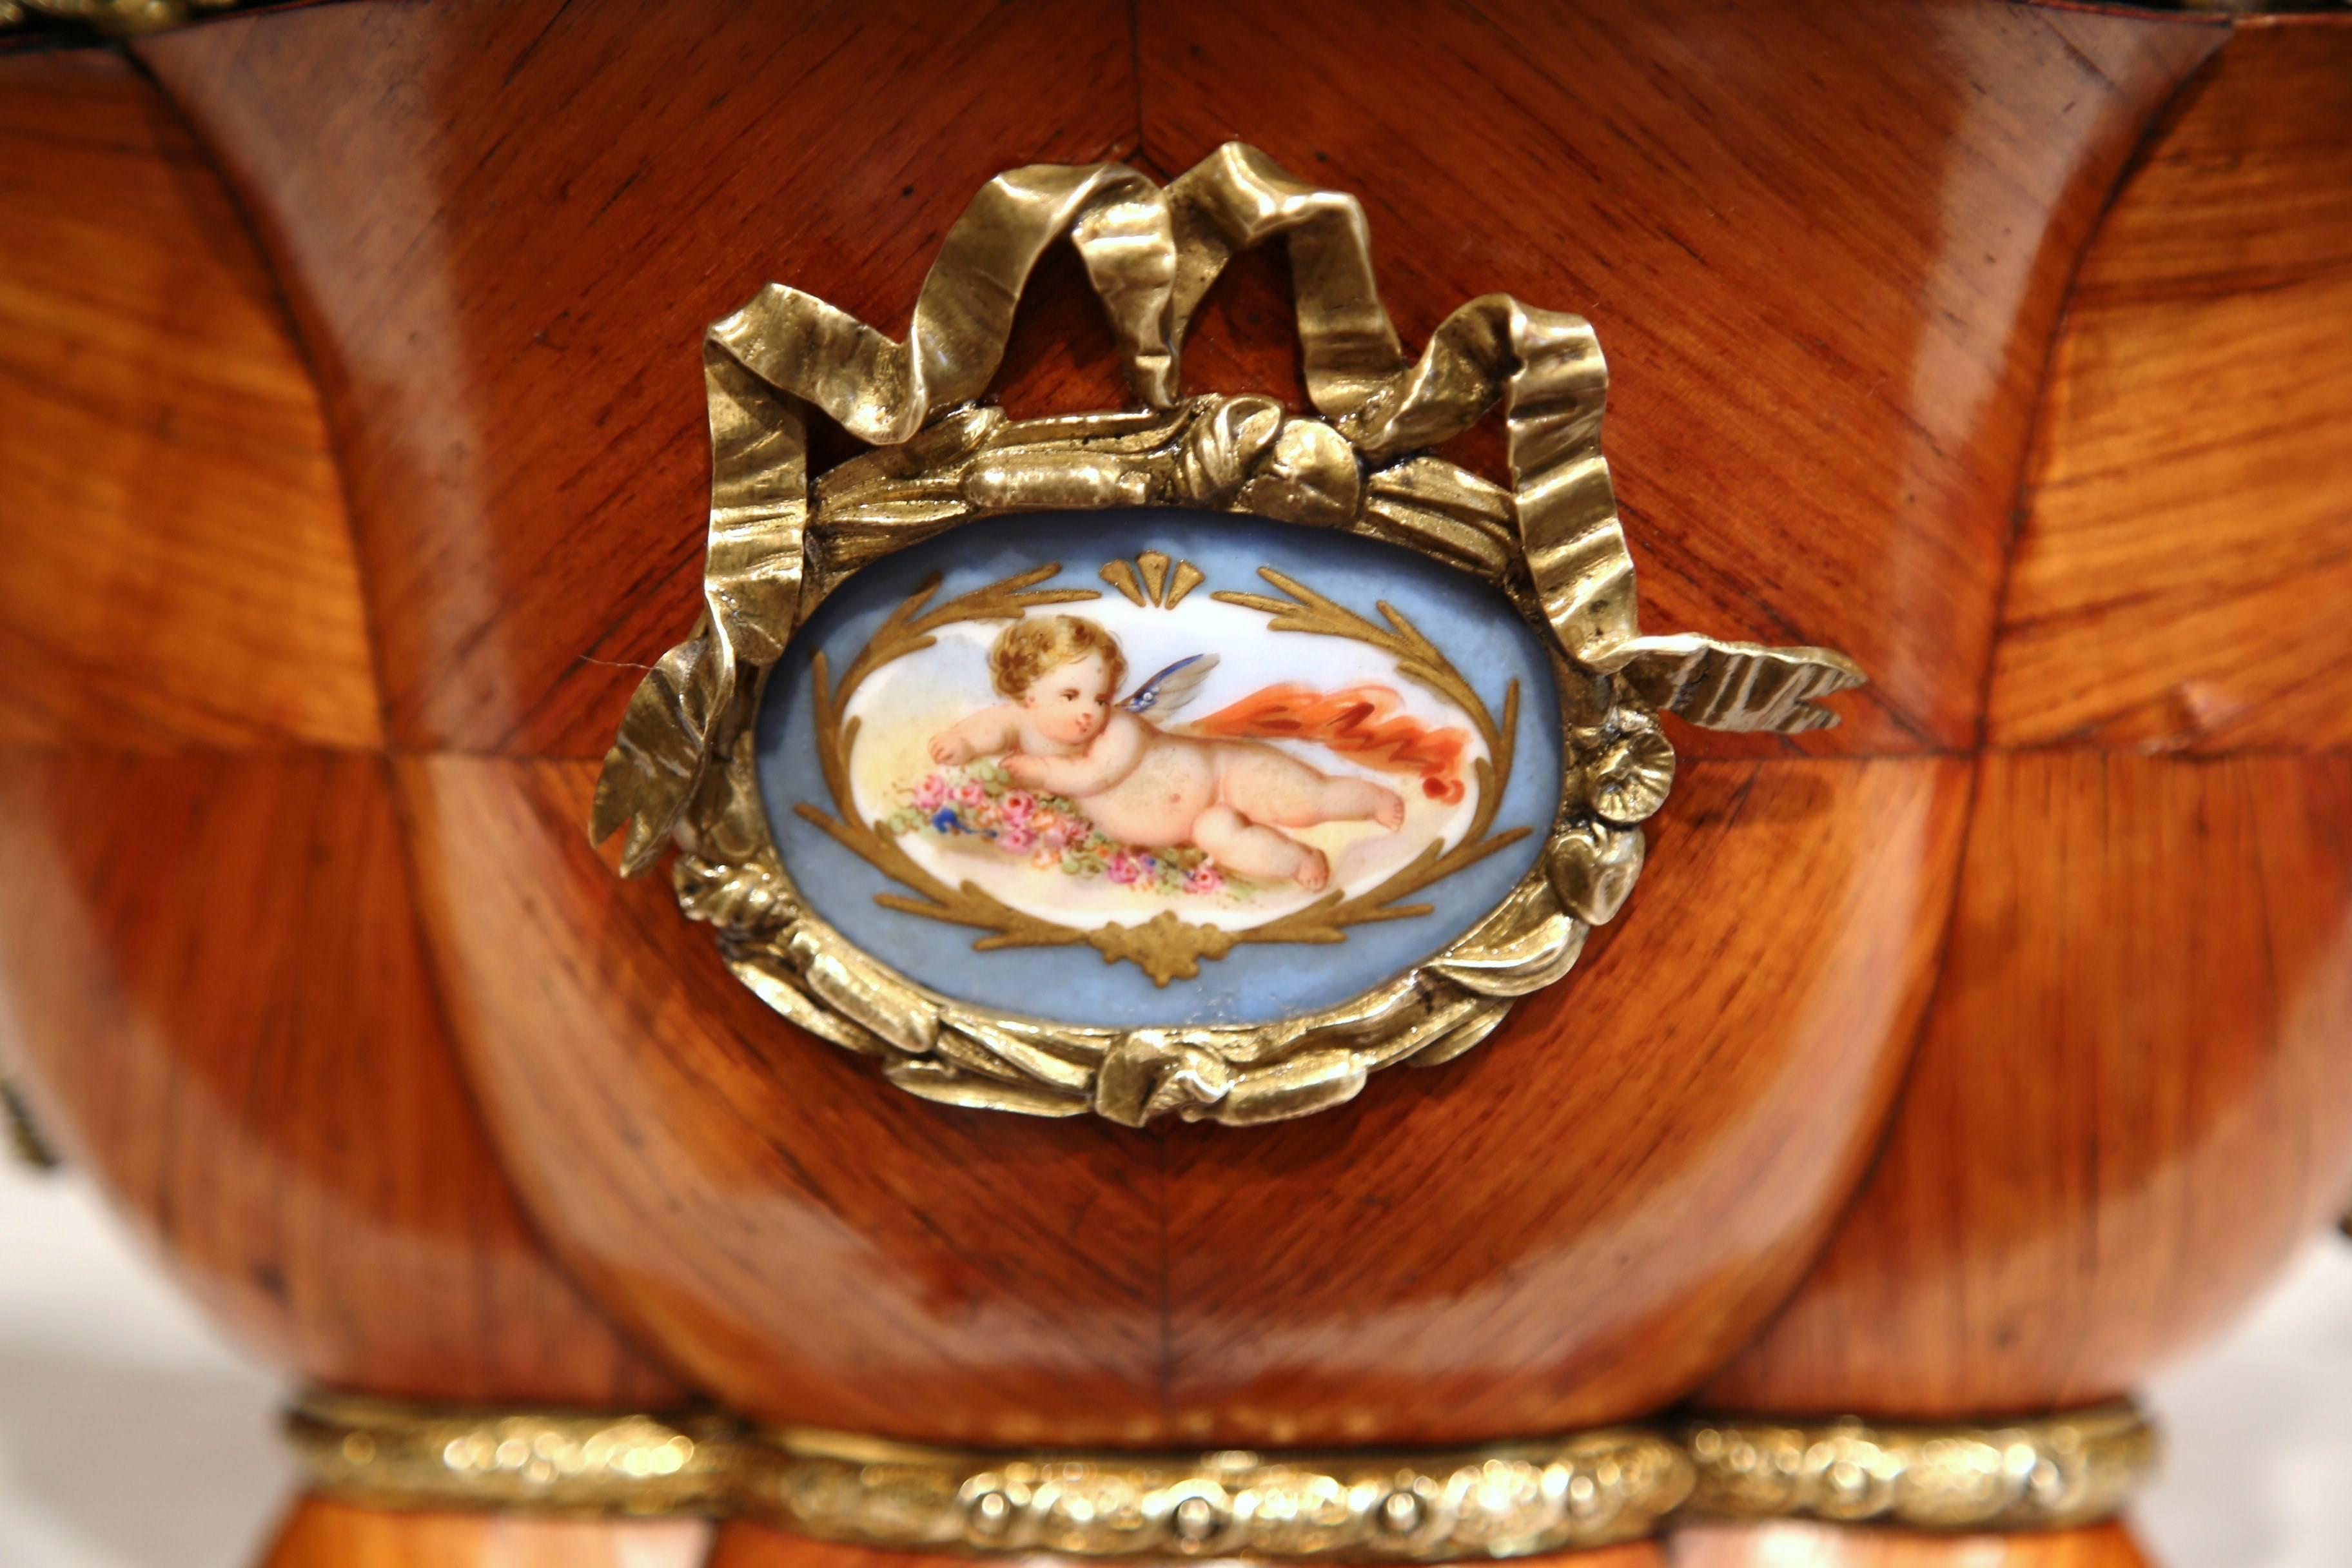 Decorate a table with this elegant antique Louis XVI jardinière. Crafted in Paris, circa 1820, this fruitwood planter features a decorative porcelain plaque on both sides featuring a cherub with wing. The hand painted medallion is further decorated